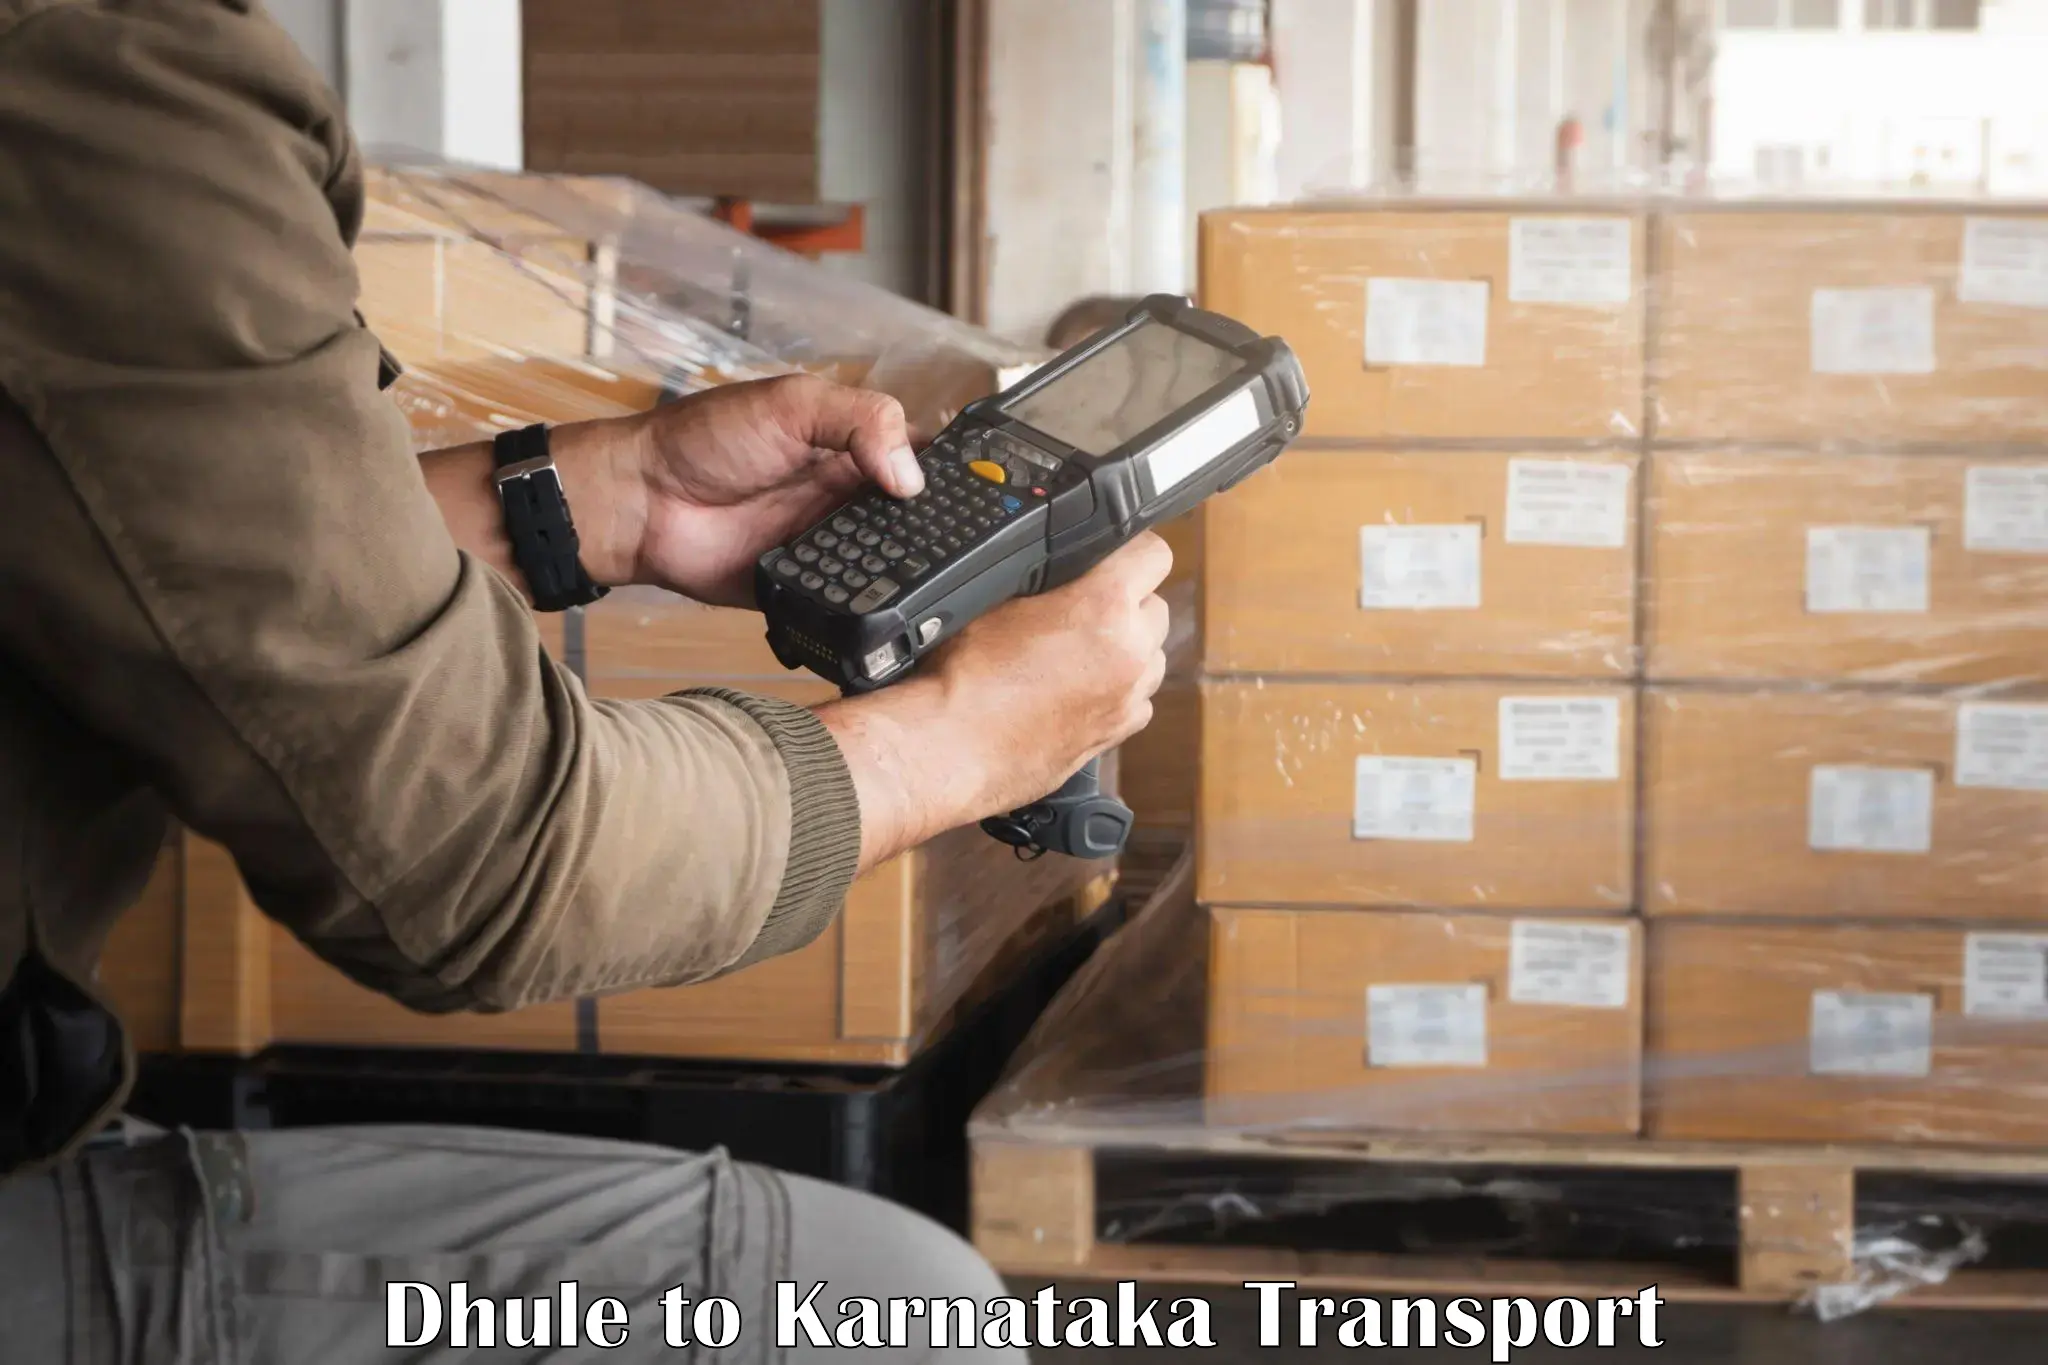 Goods delivery service Dhule to Bantwal